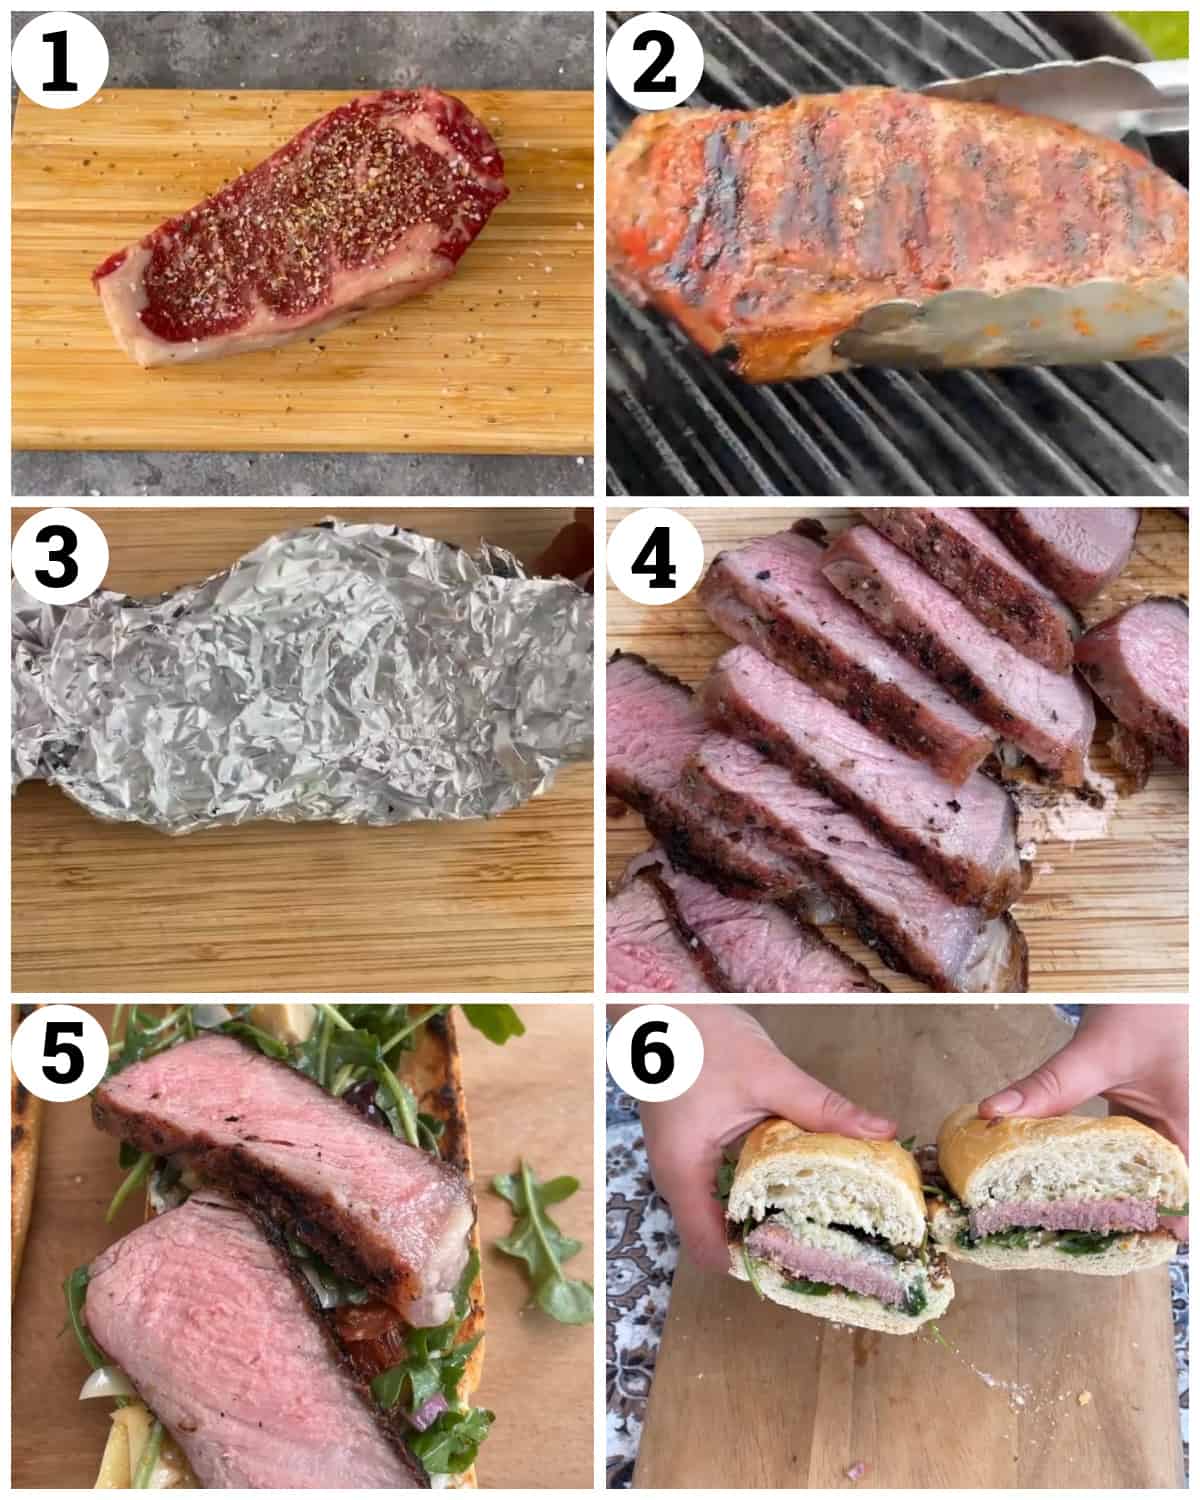 season and grill the steak then rest and slice. Assemble the sandwiches.